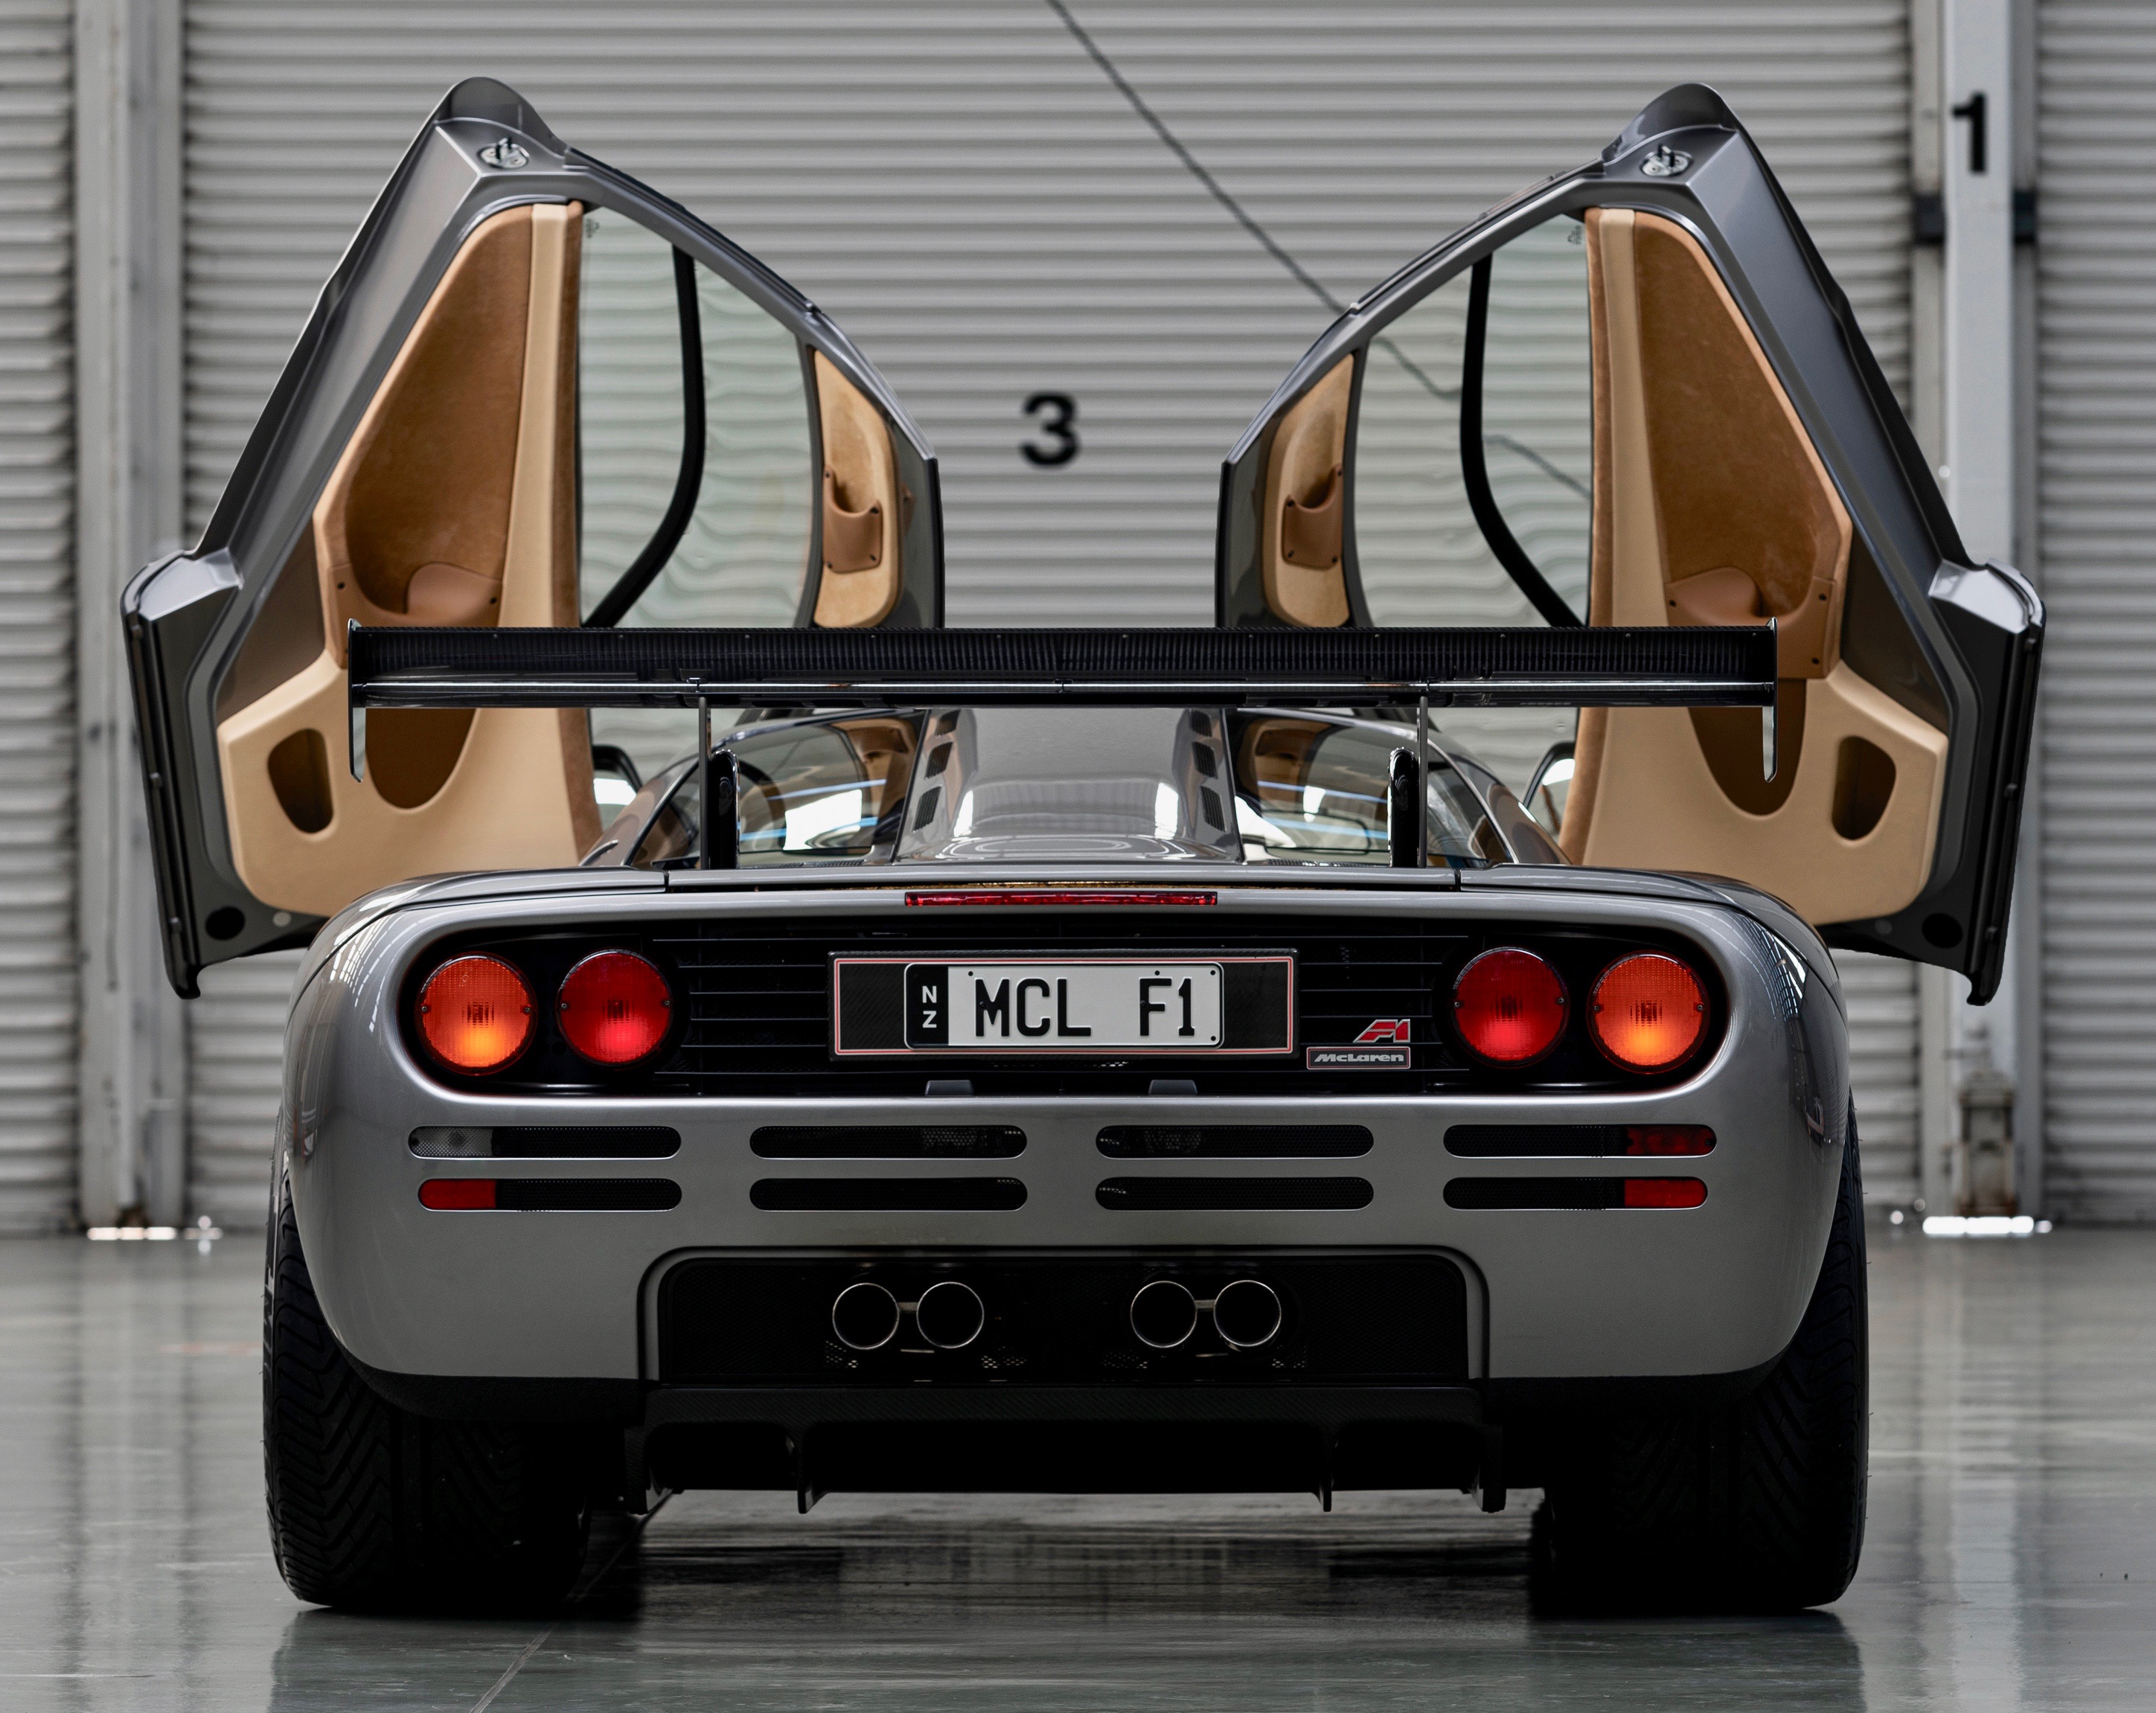 McLaren F1, McLaren F1 with LM specification consigned to RM Sotheby’s Monterey auction, ClassicCars.com Journal